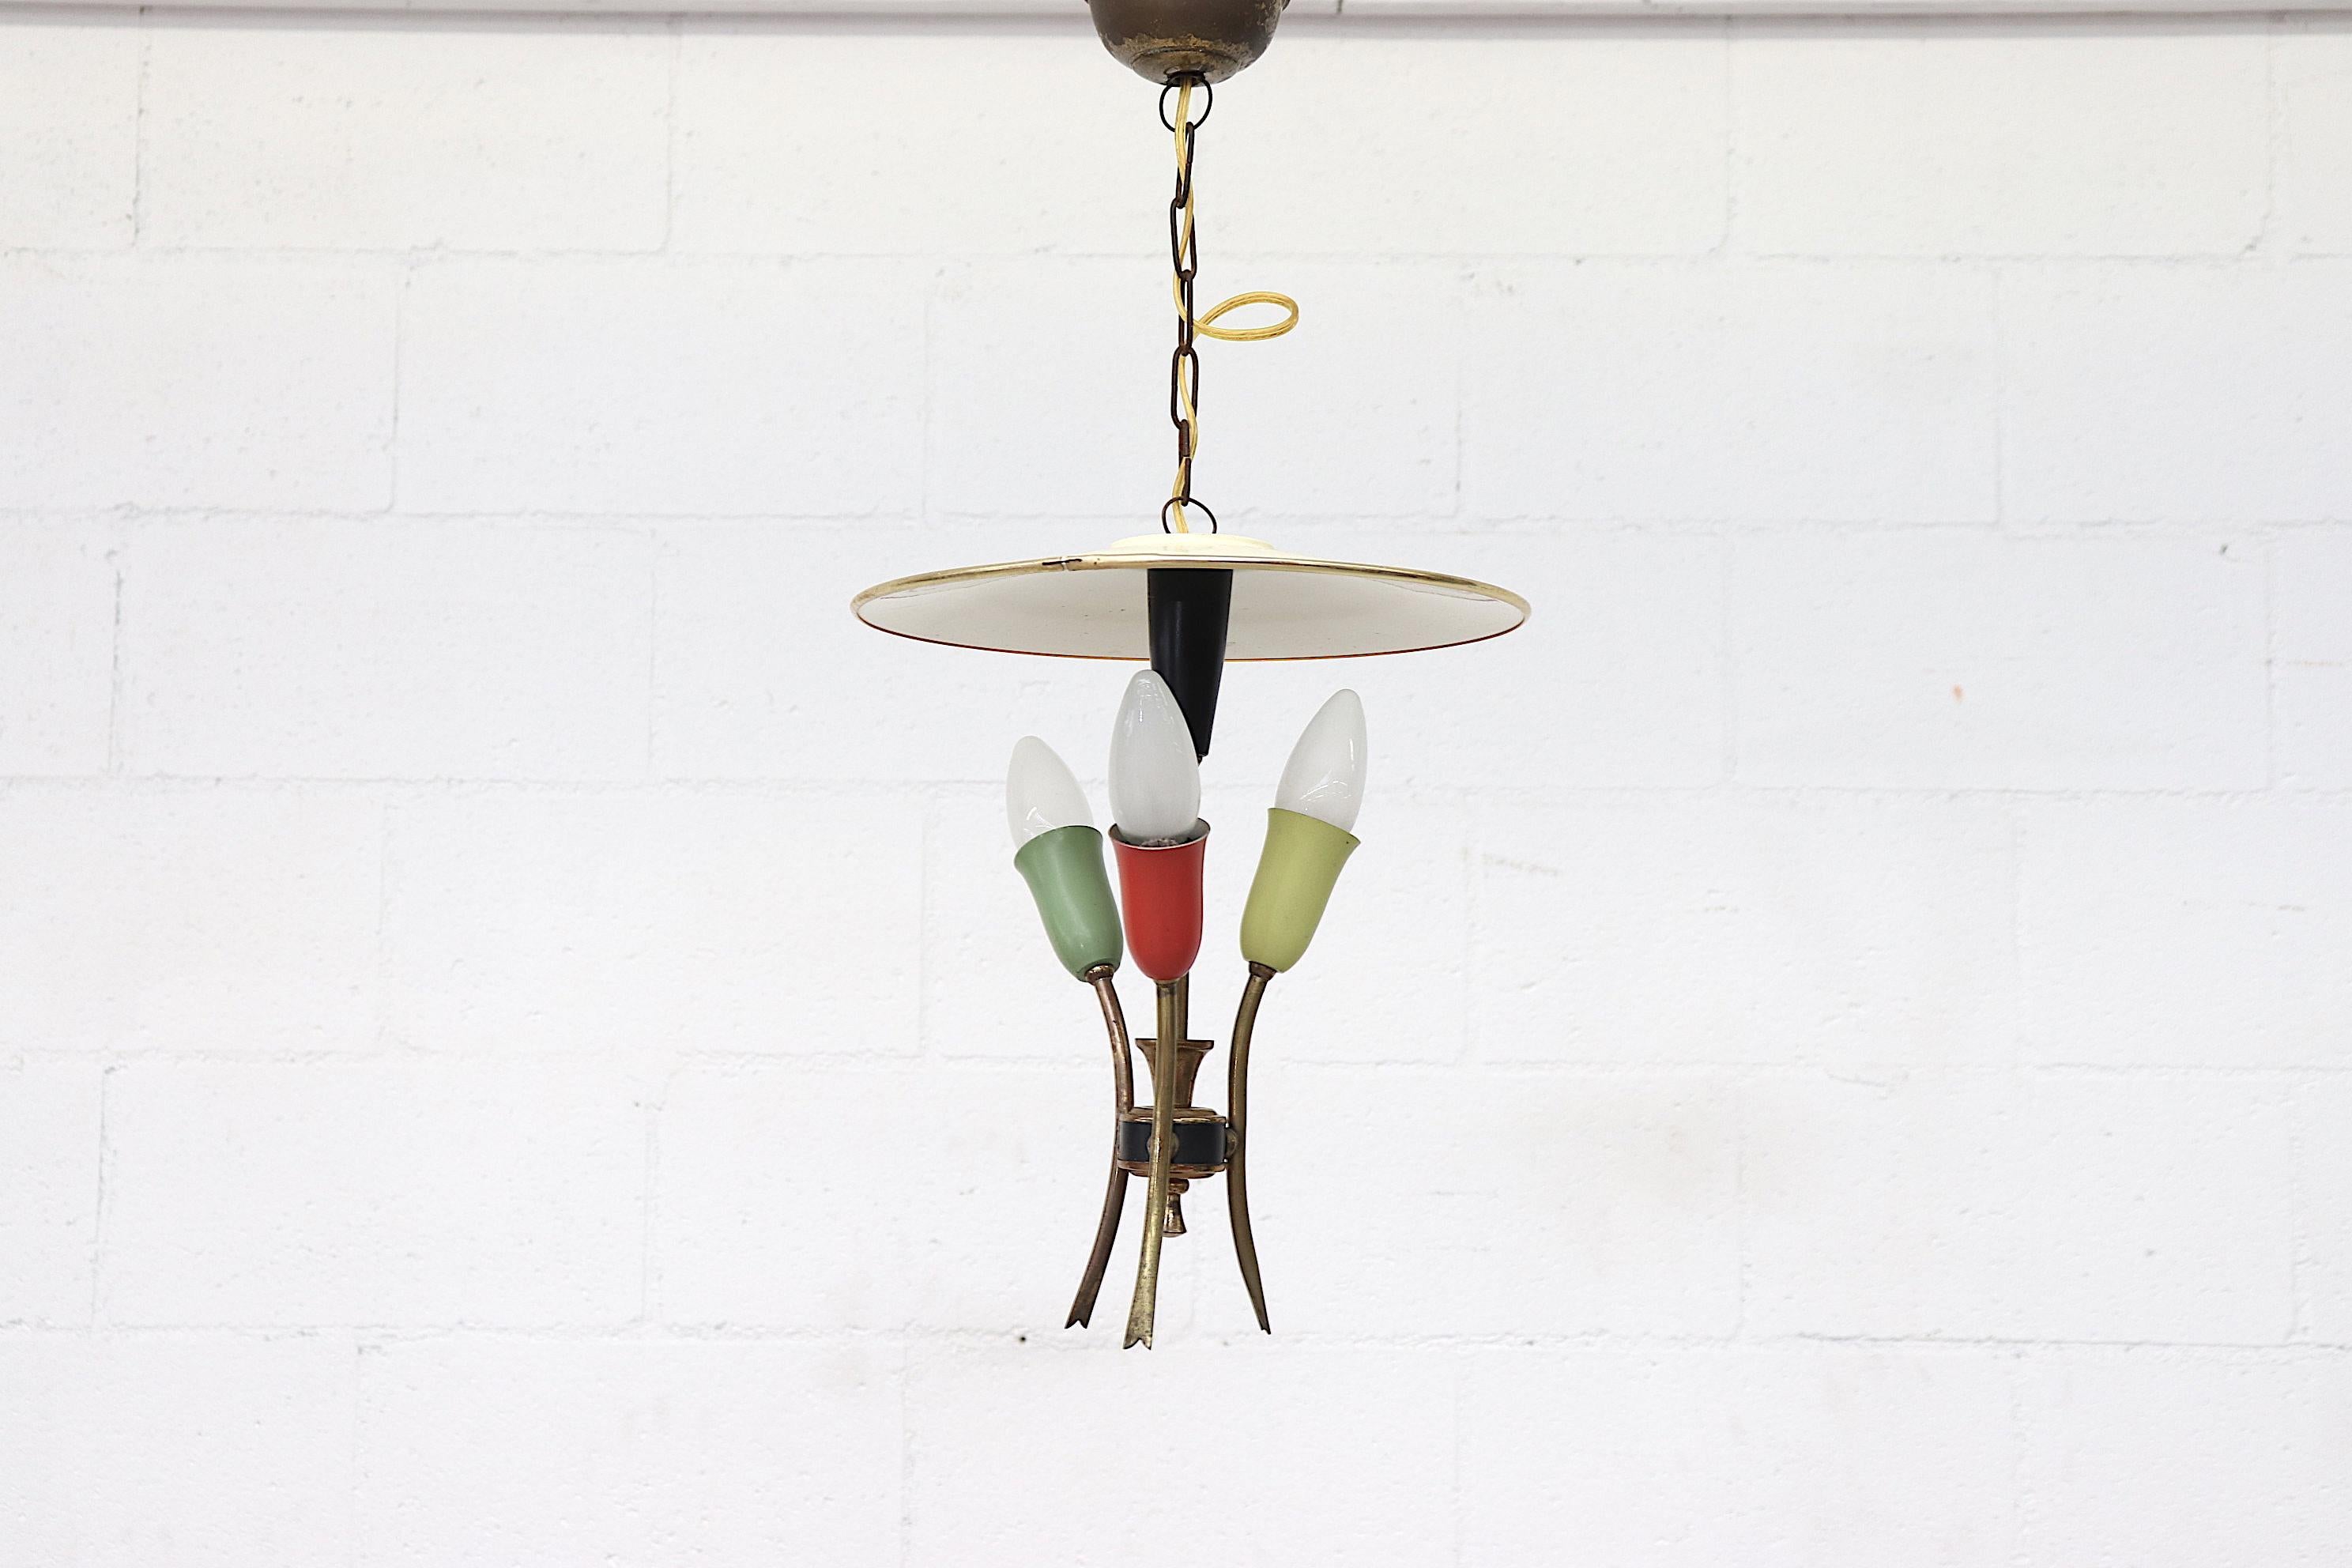 Beautiful Brass Stilnovo style three bulb chandelier with spun enameled metal hat. Classy and elegant design with energetic red, green and lime green sockets to accent. In original condition with minor scratches and some wear. European candelabra